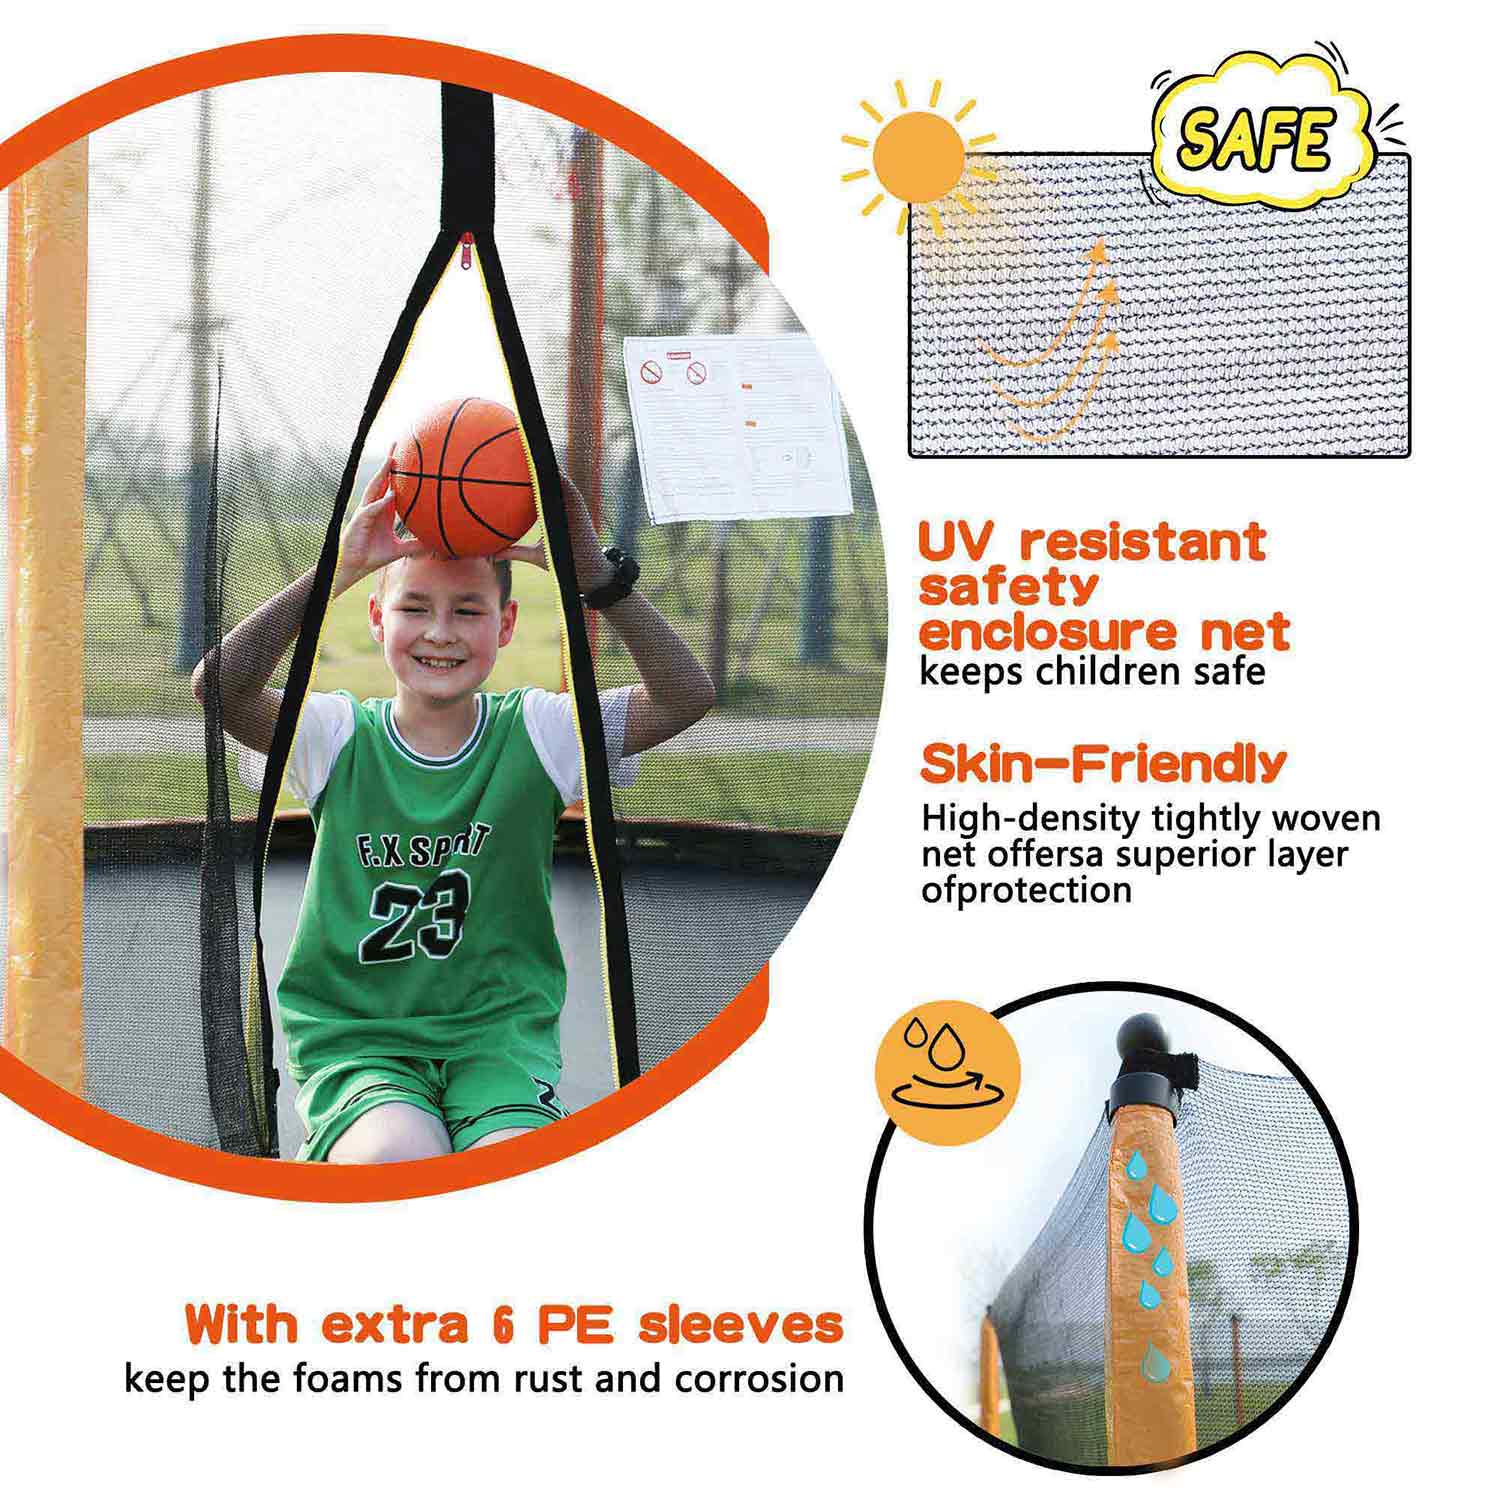 The boy is sitting on the 15ft orange trampoline and holding a basketball with the text next to it saying: UV resistant safety enclosure net keeps children safe, skin-friendly, with extra 6 pe sleeves